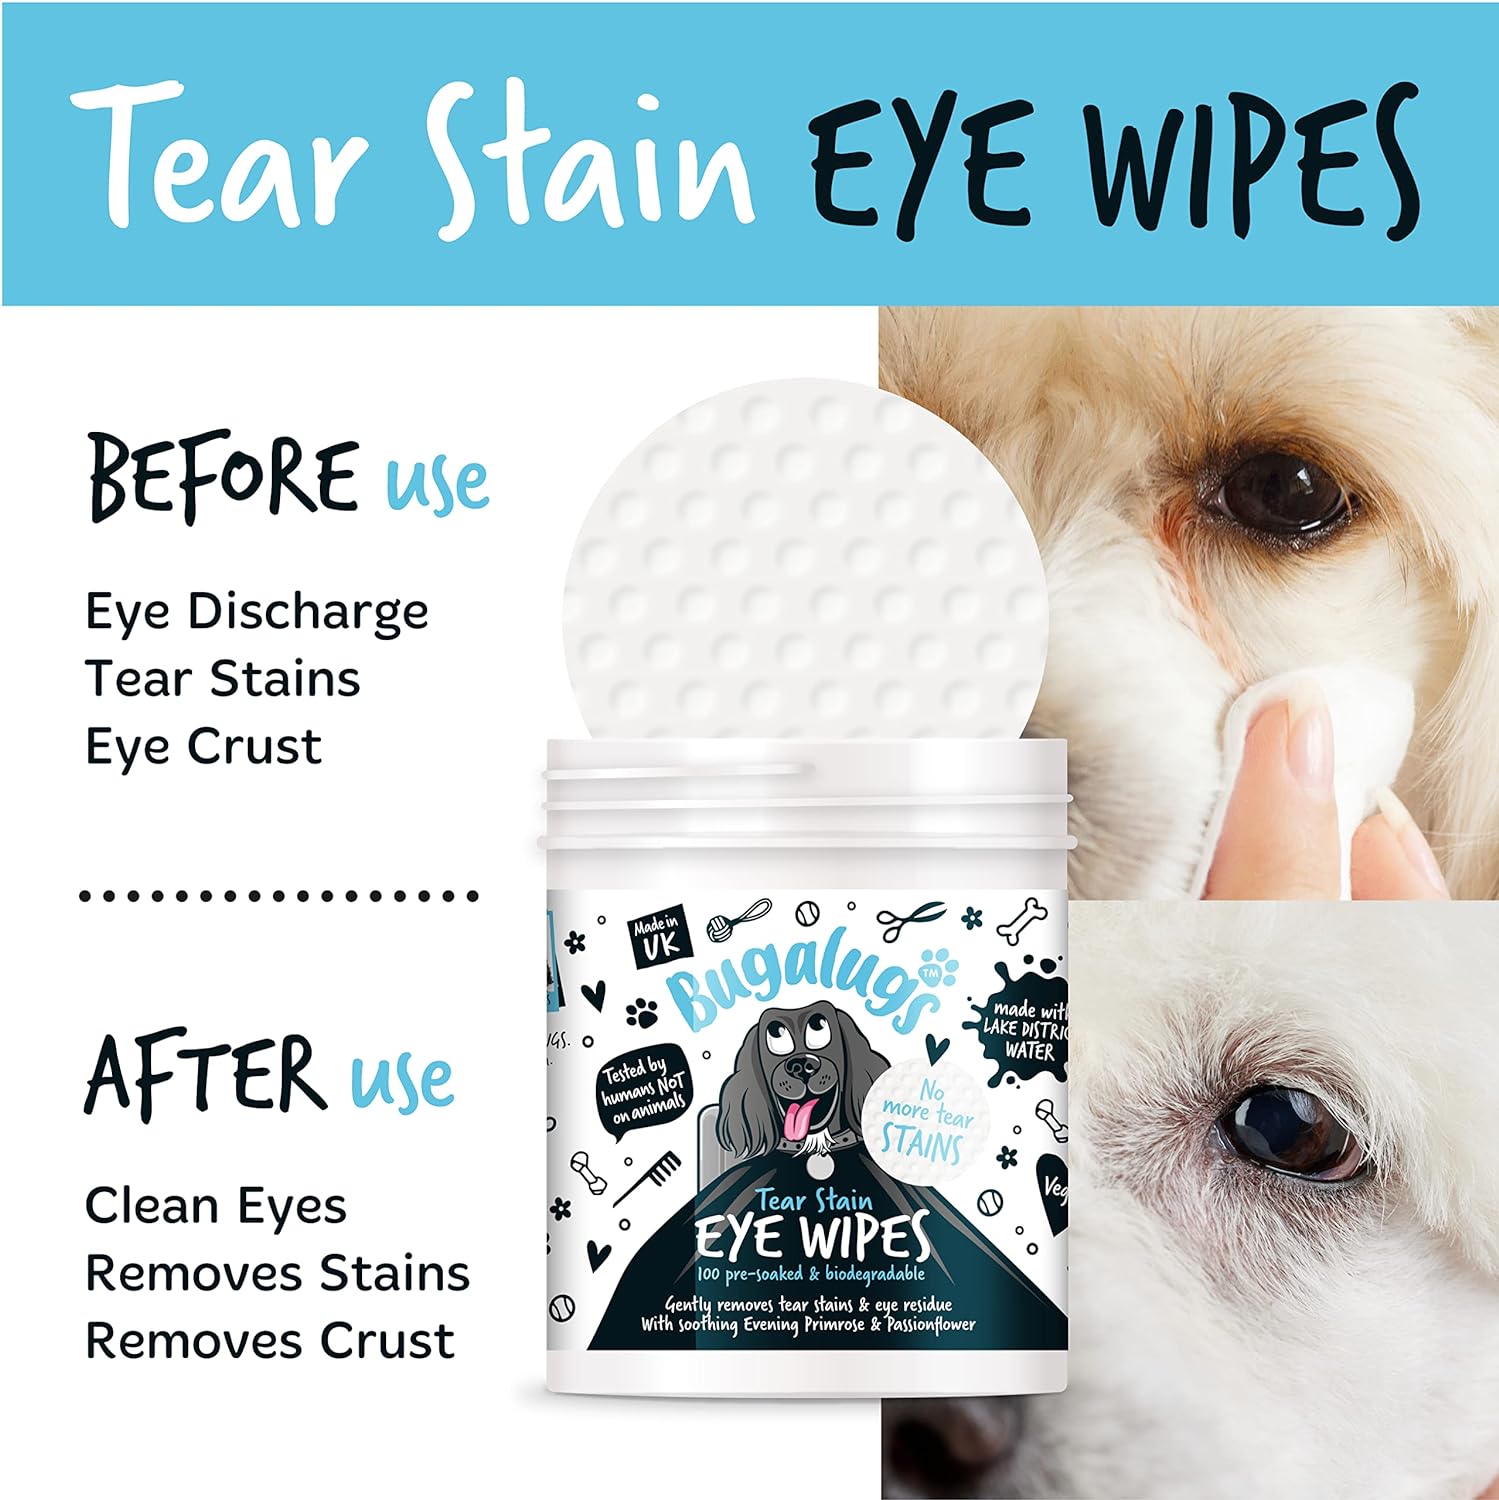 BUGALUGS Dog Eye Wipes 100 Biodegradable Textured pre-Soaked Dog Wipes. Safe & Easy Cleaning for Dogs - Pet Eye Wipes Remove Tear Stains, Dog Eye Crust & Eye Discharge : Pet Supplies